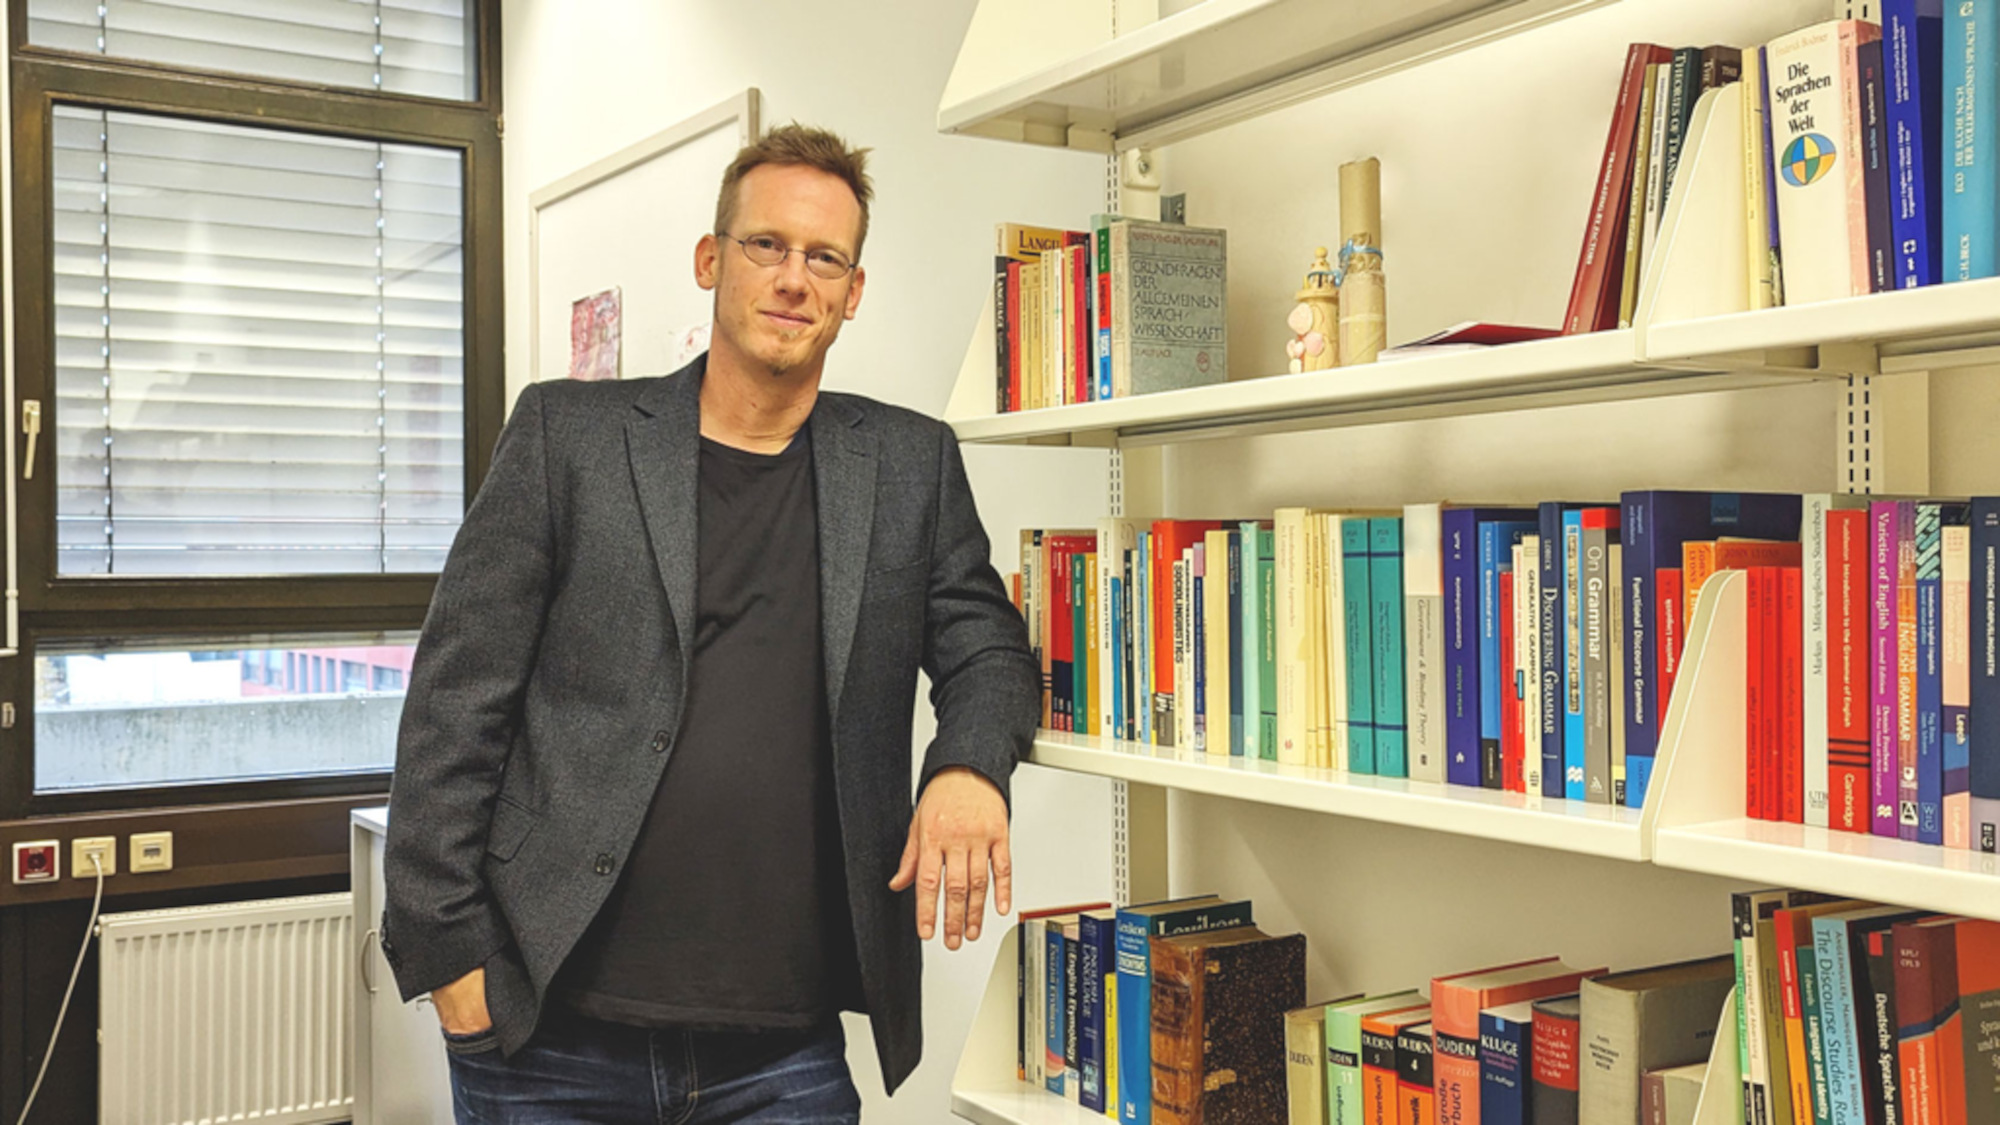 Andreas Jäger stands next to a bookshelf in his office.